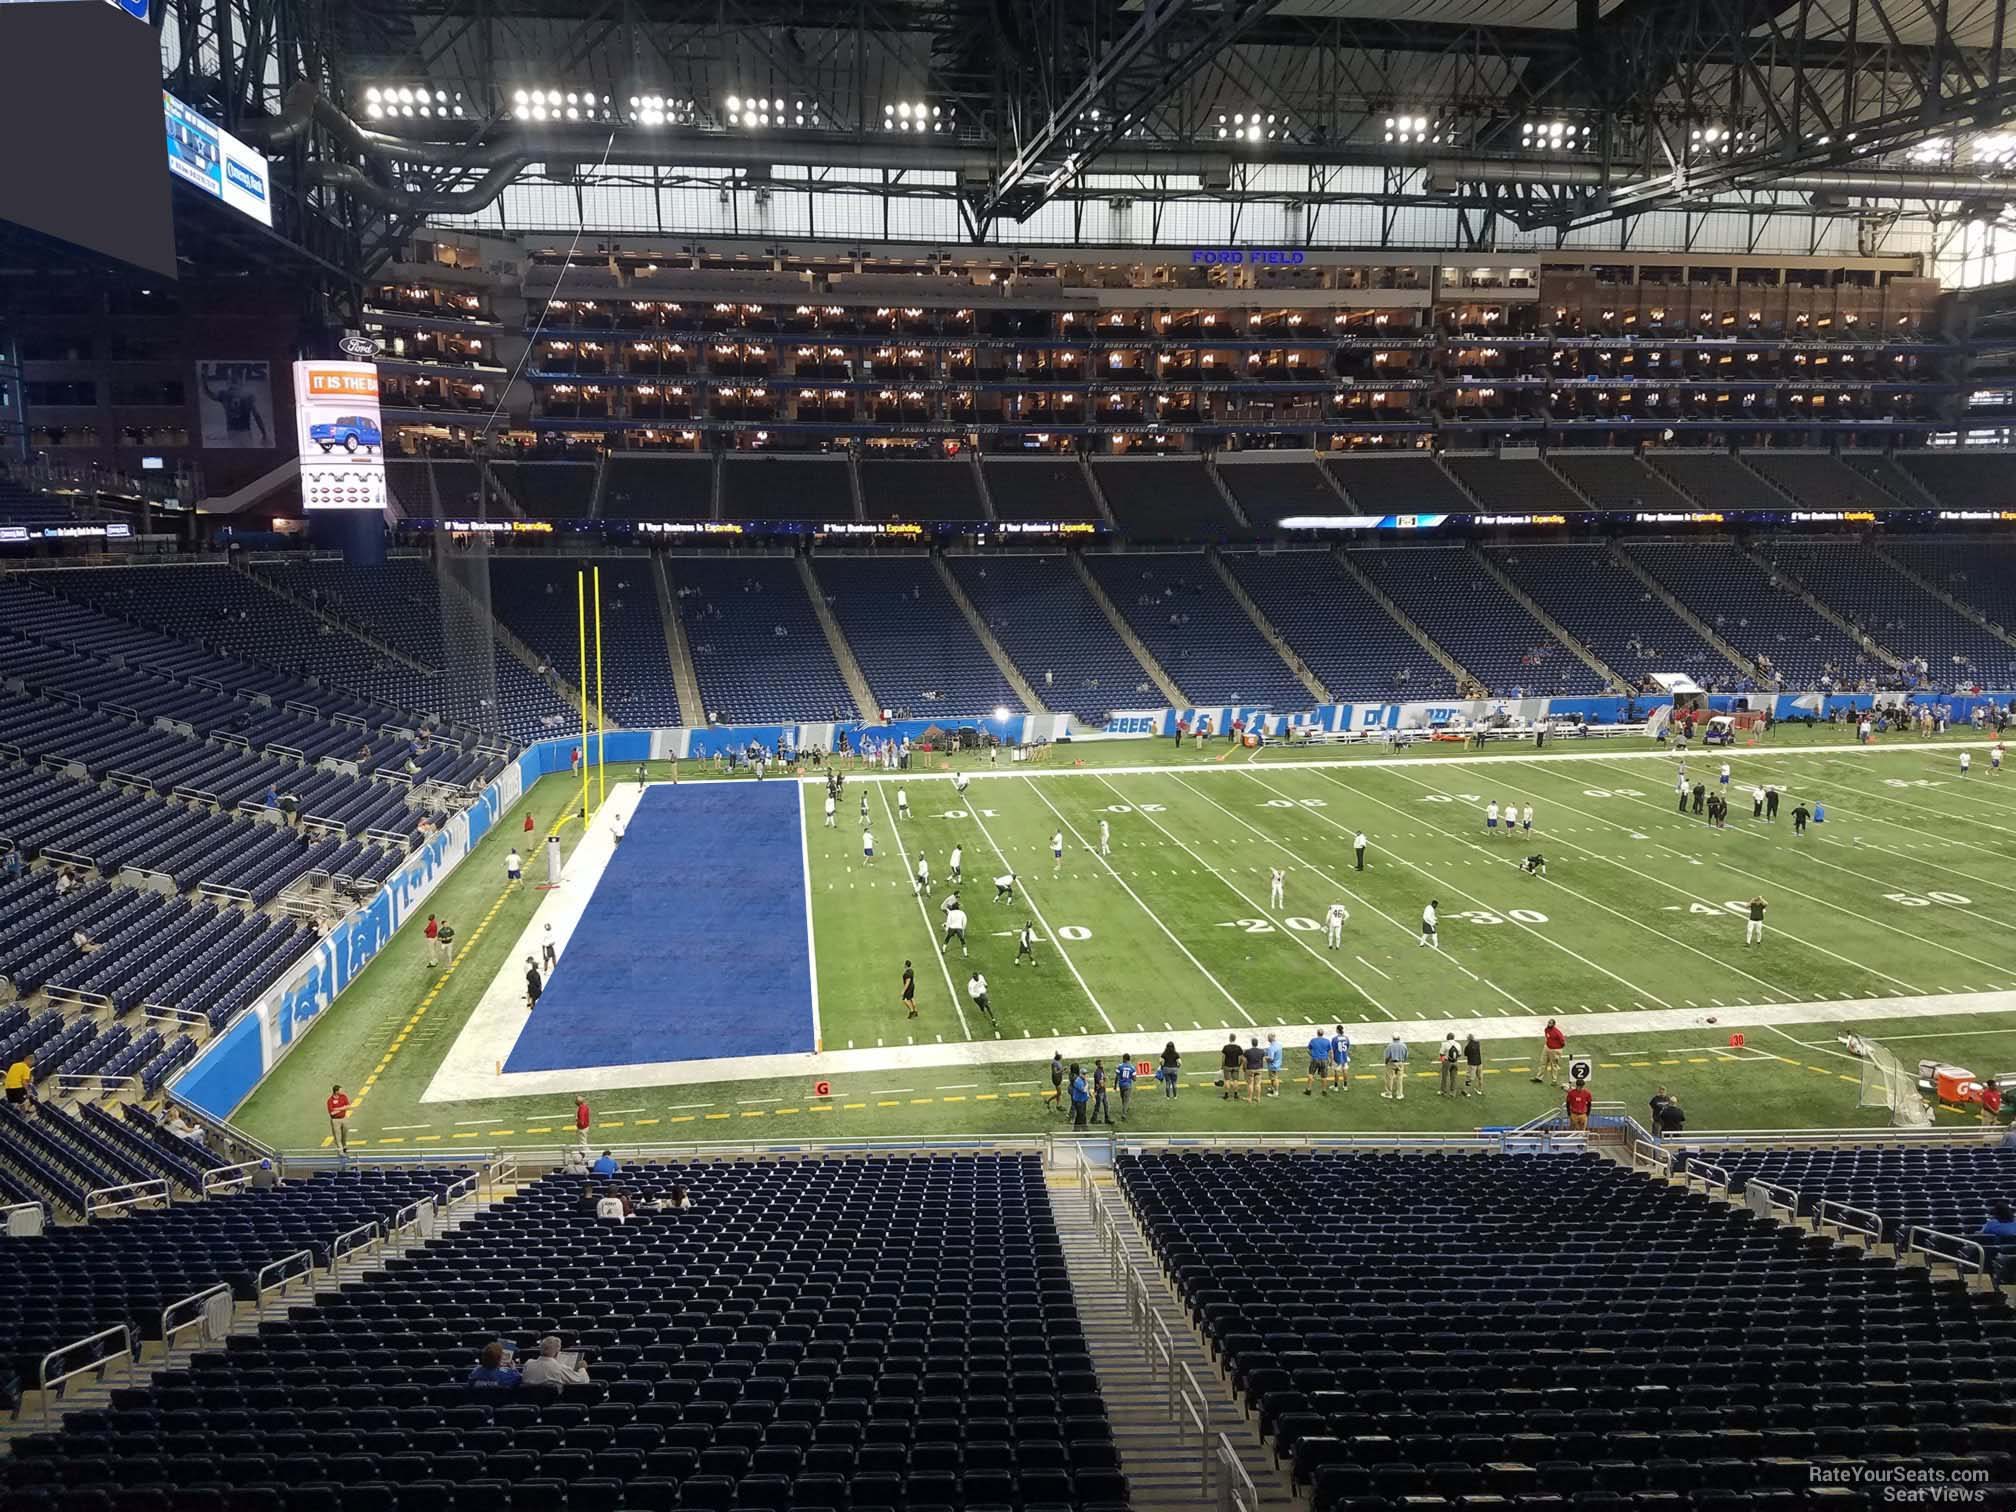 Section 227 at Ford Field 